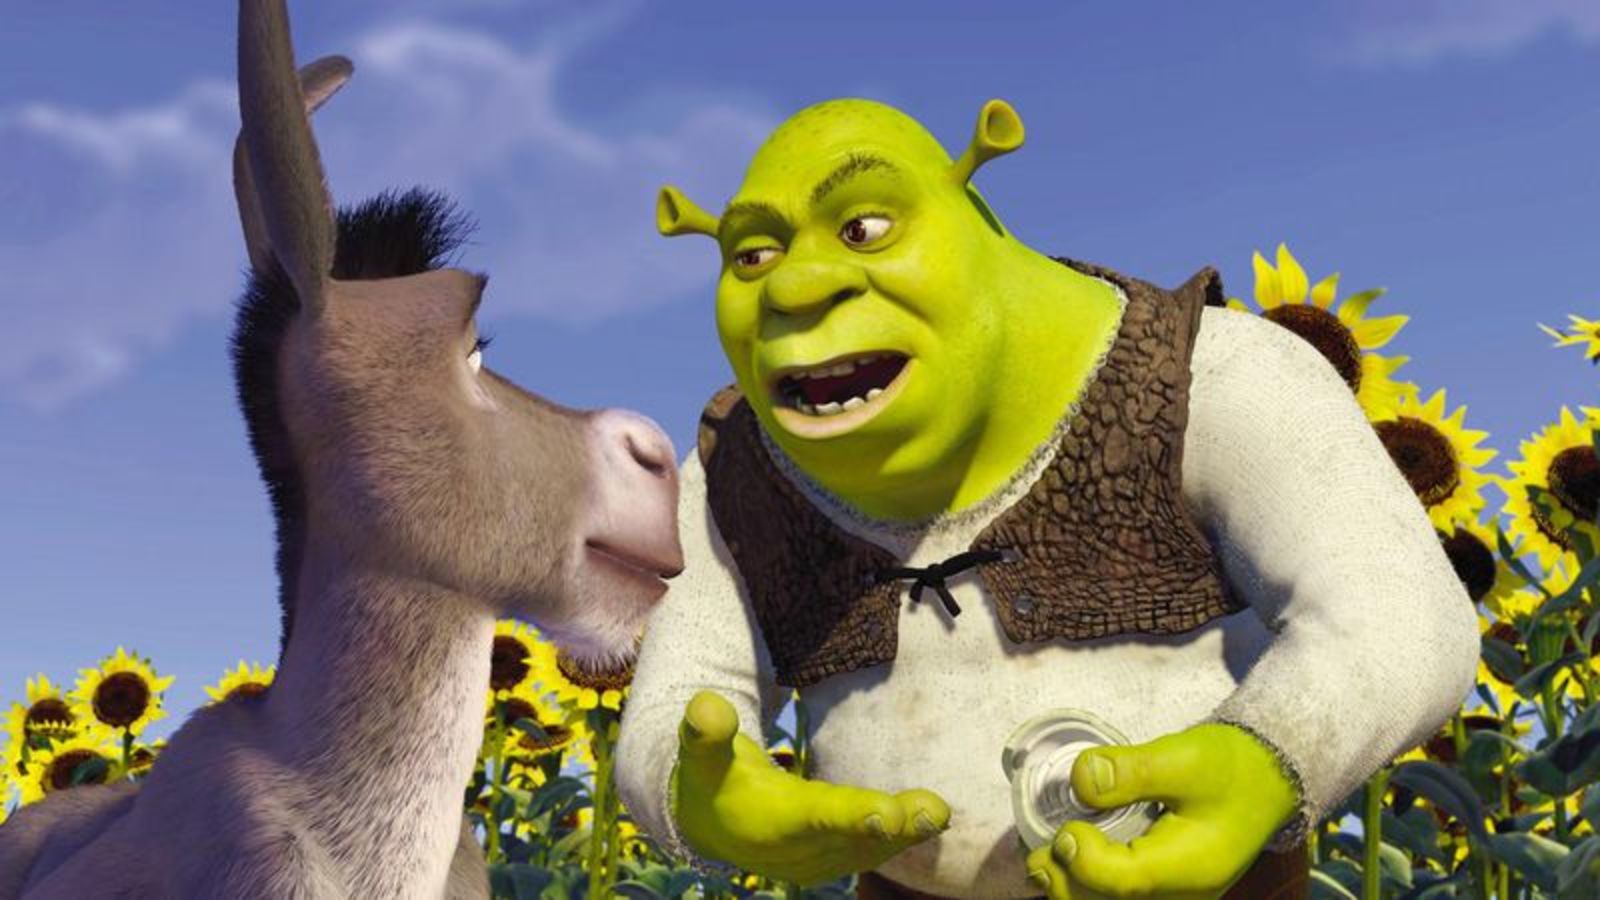 Shrek 5 Script, Production and Release Date